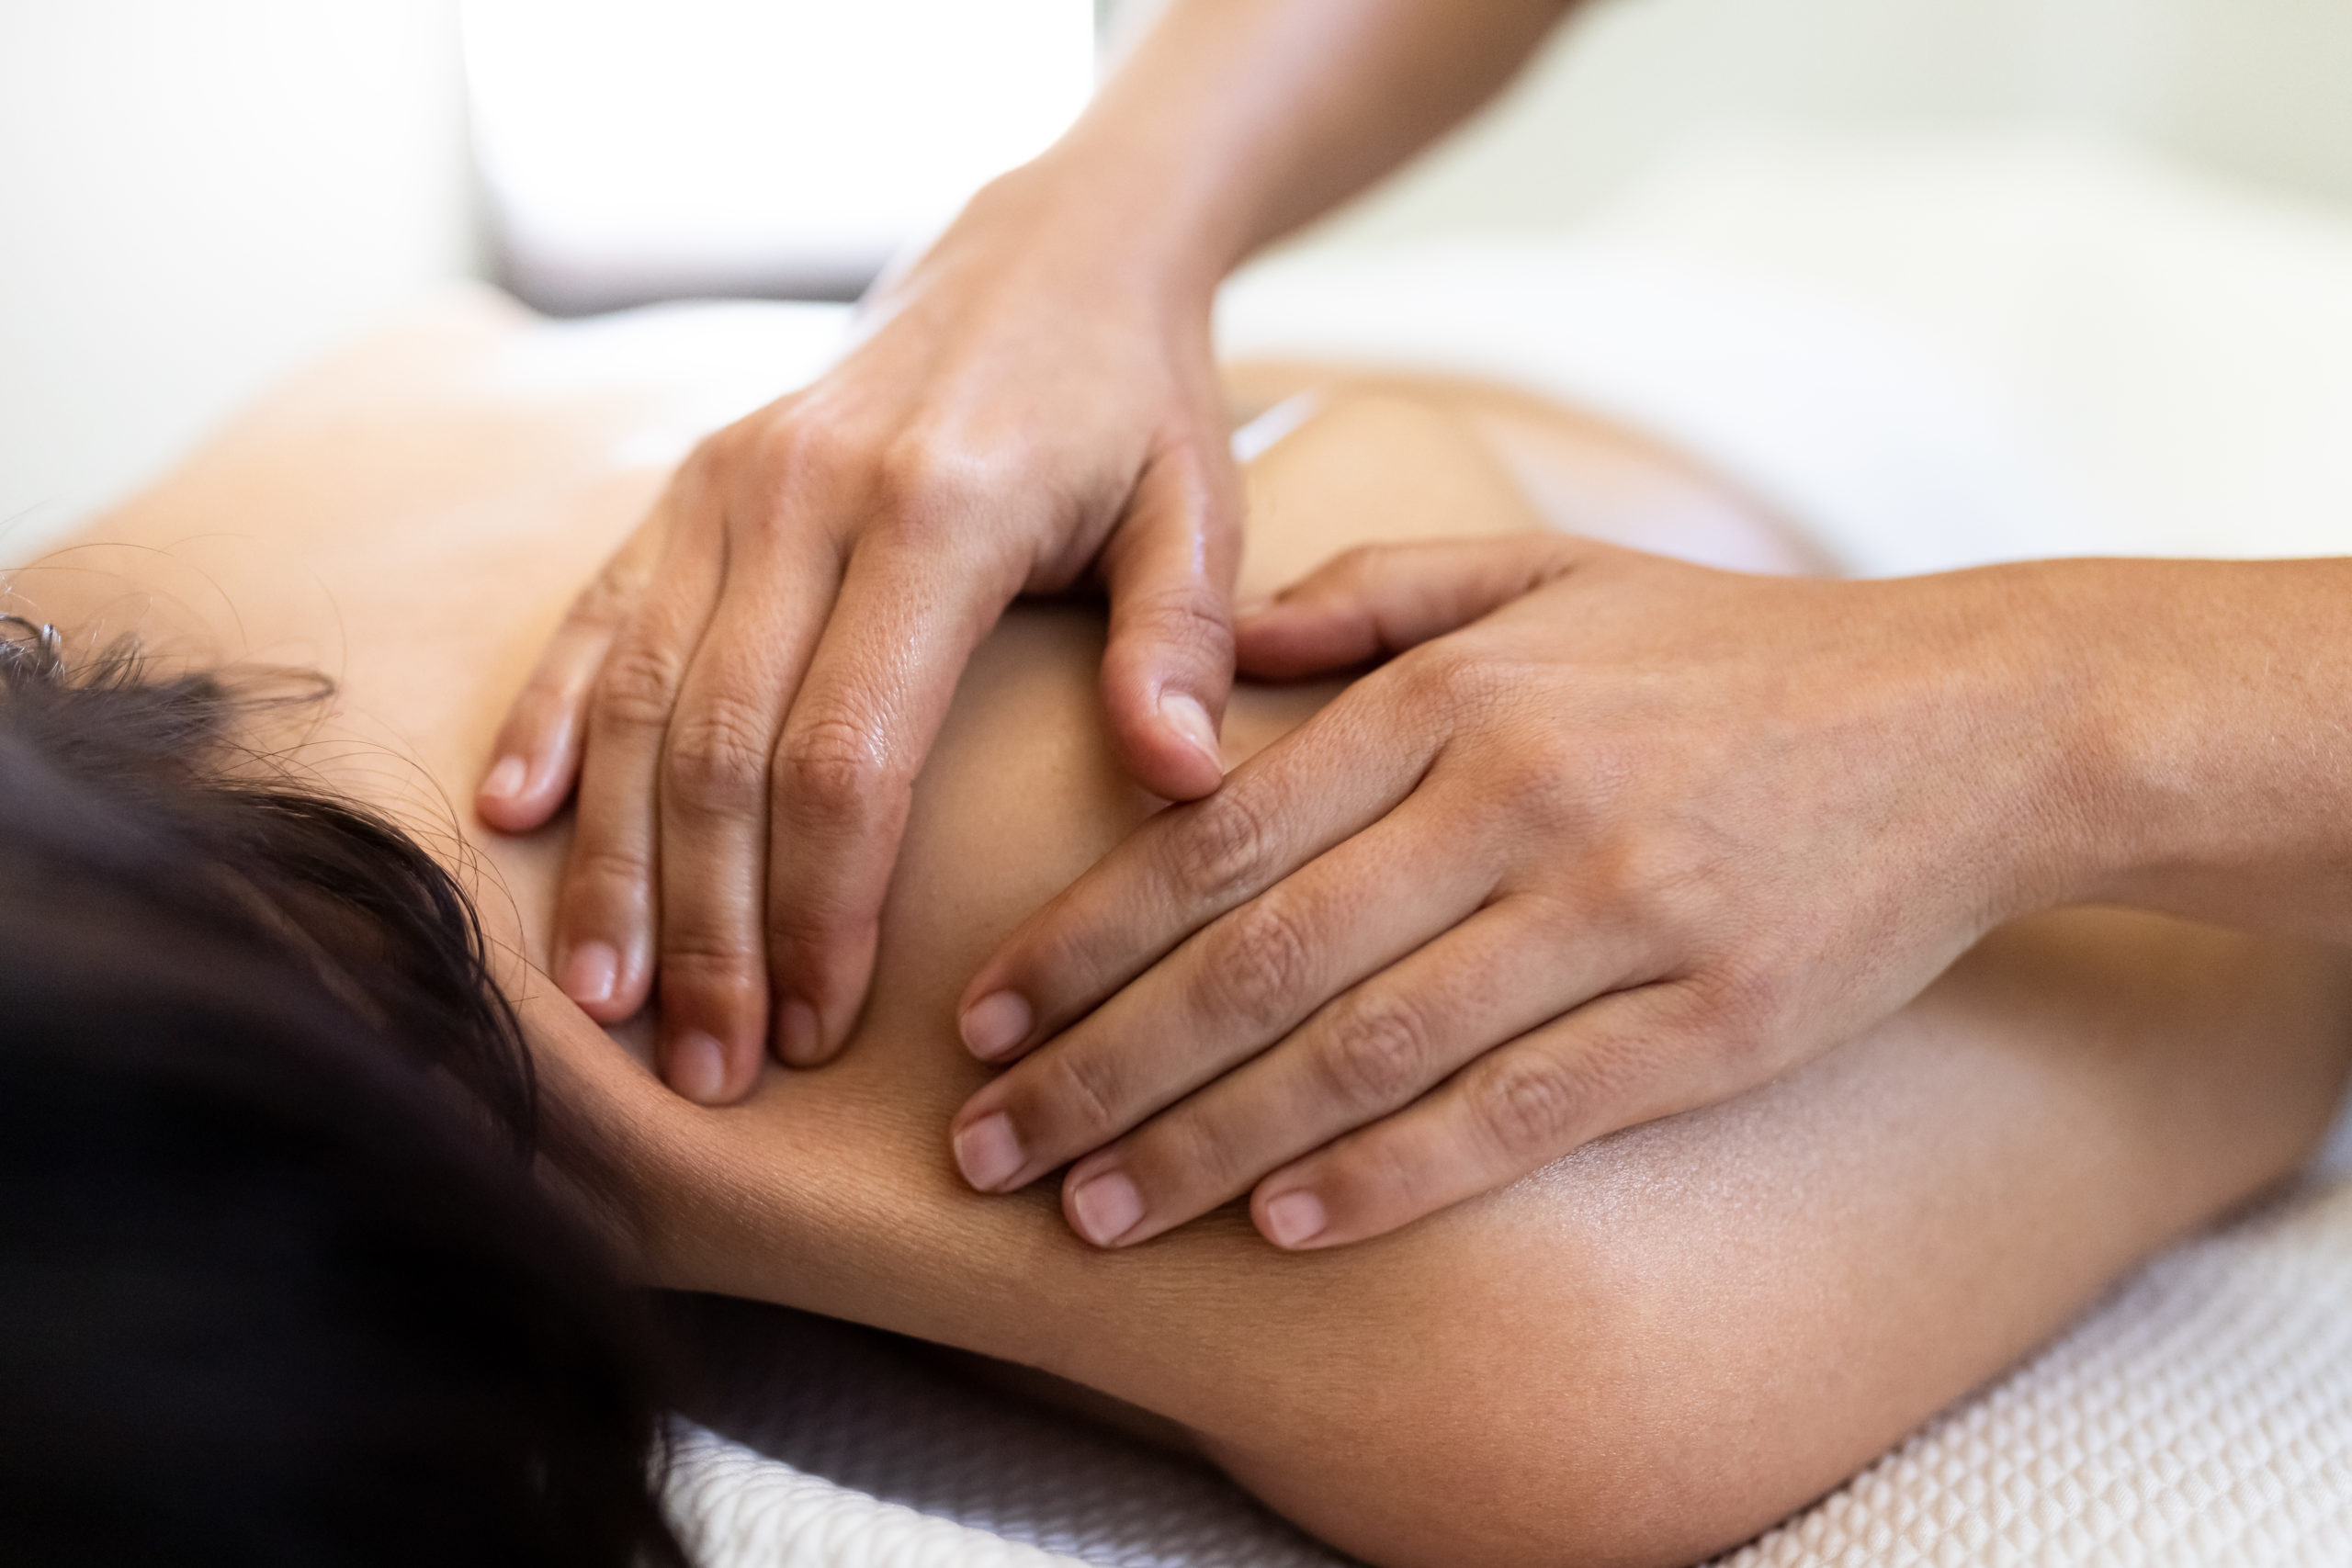 Closeup of woman’s hands giving a relaxing back massage to female client.